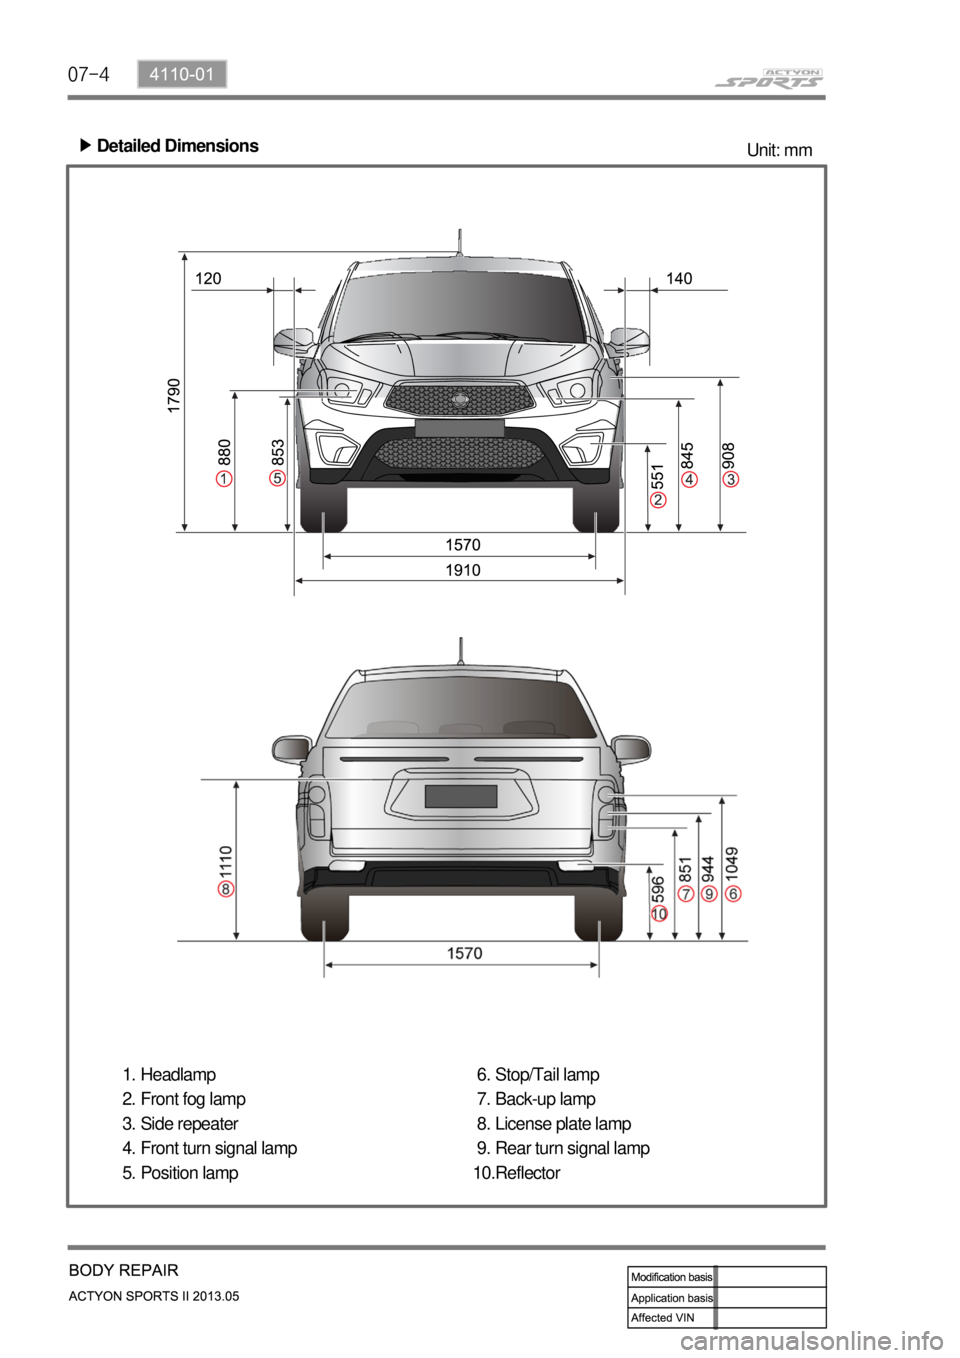 SSANGYONG NEW ACTYON SPORTS 2013 Workshop Manual 07-4
Detailed Dimensions ▶
Unit: mm
Headlamp
Front fog lamp
Side repeater
Front turn signal lamp
Position lamp 1.
2.
3.
4.
5.Stop/Tail lamp
Back-up lamp
License plate lamp
Rear turn signal lamp
Refl